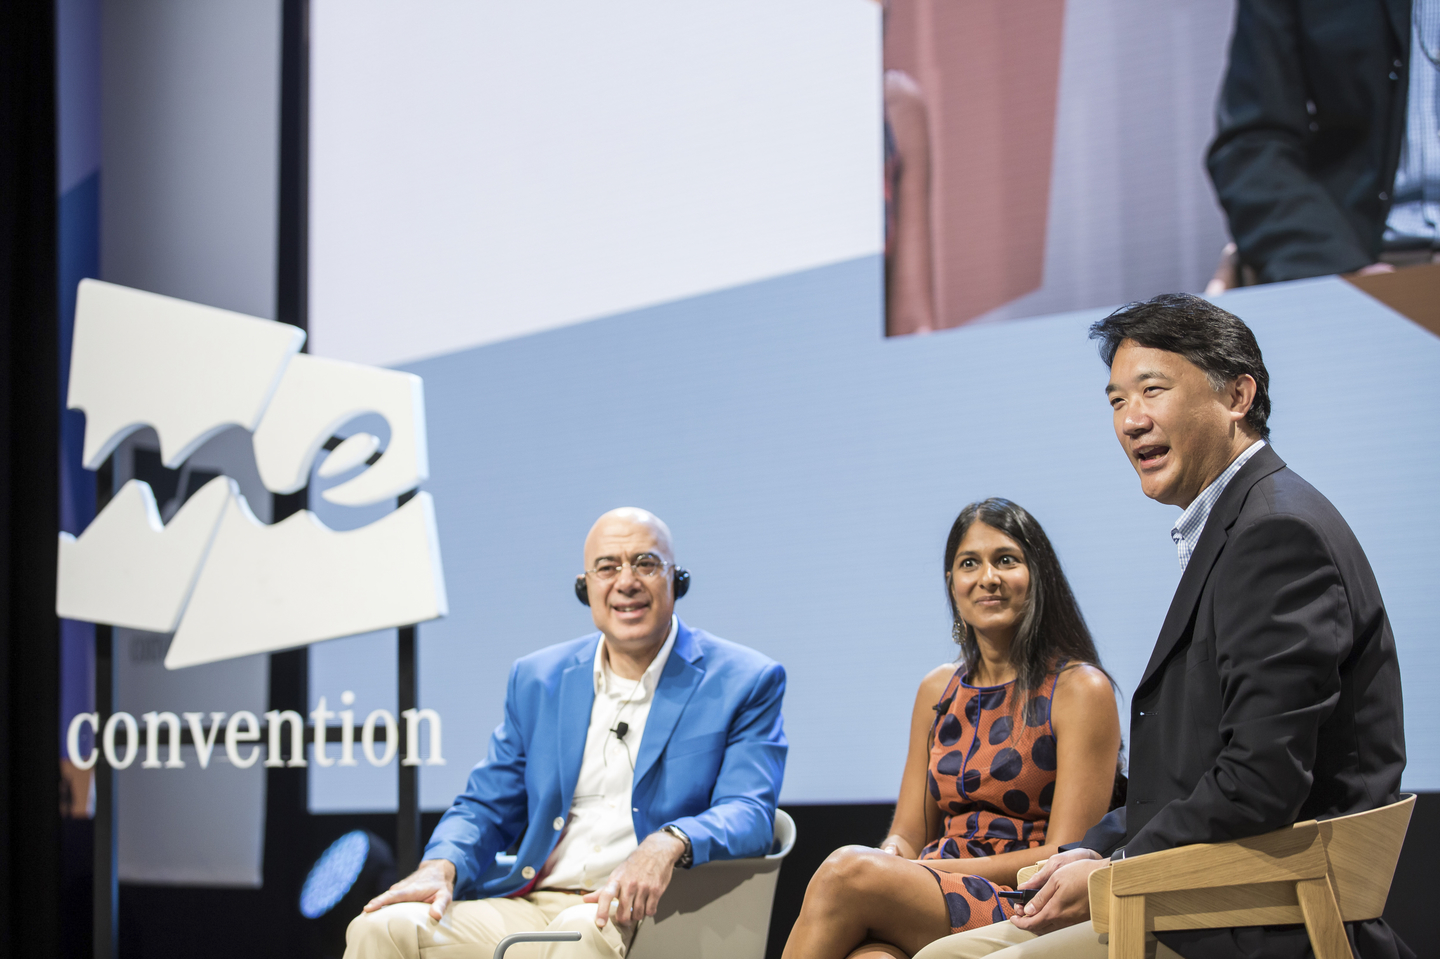 (L-R) Glenn Zorpette, Neema Singh Guliani and Christopher S. Lee formed the “The Price of Security: AI, Facial Recognition, and the Future of Policing” panel. Photo by Teymur Madjderey/Daimler AG